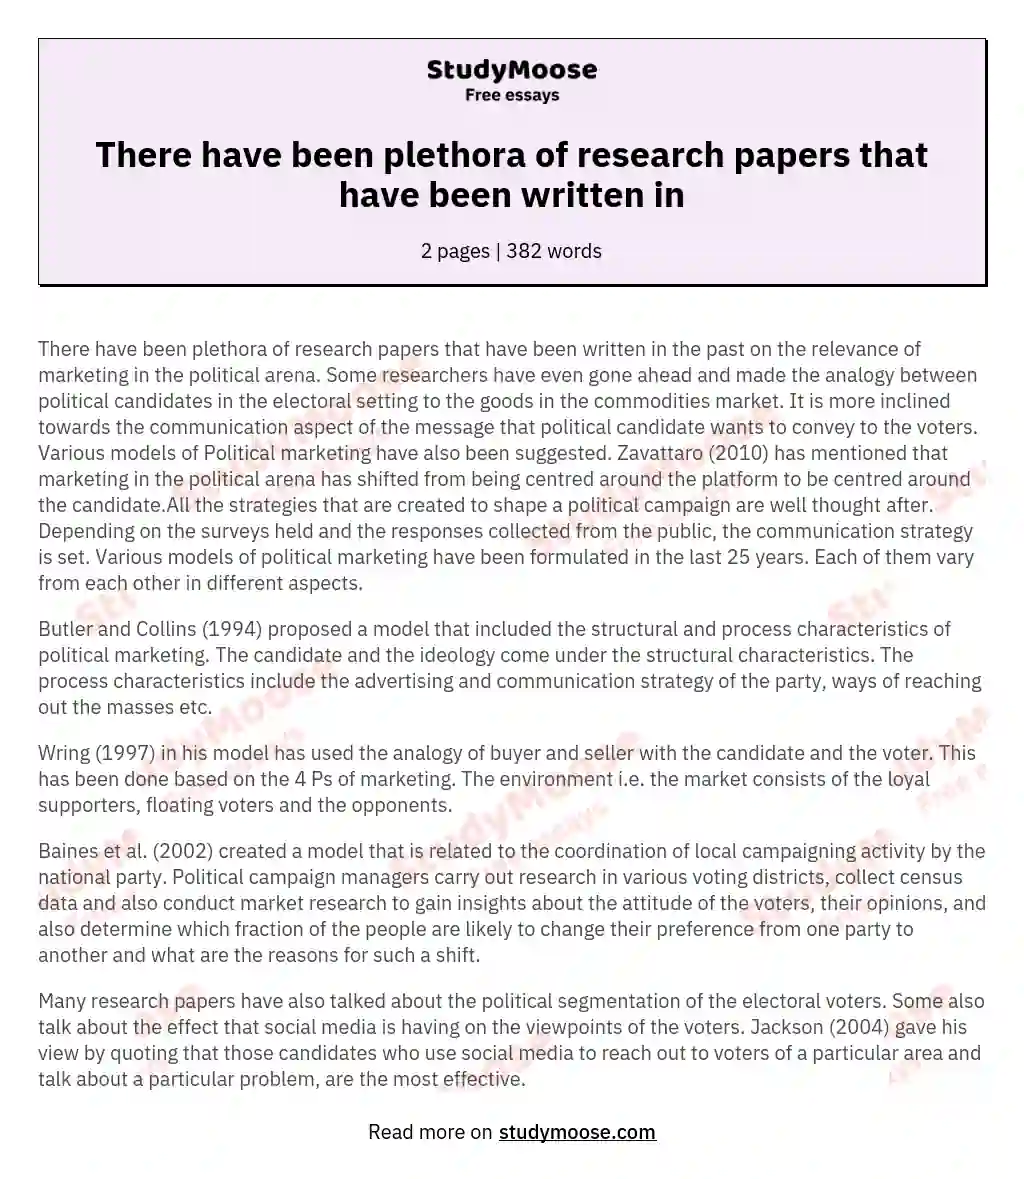 There have been plethora of research papers that have been written in